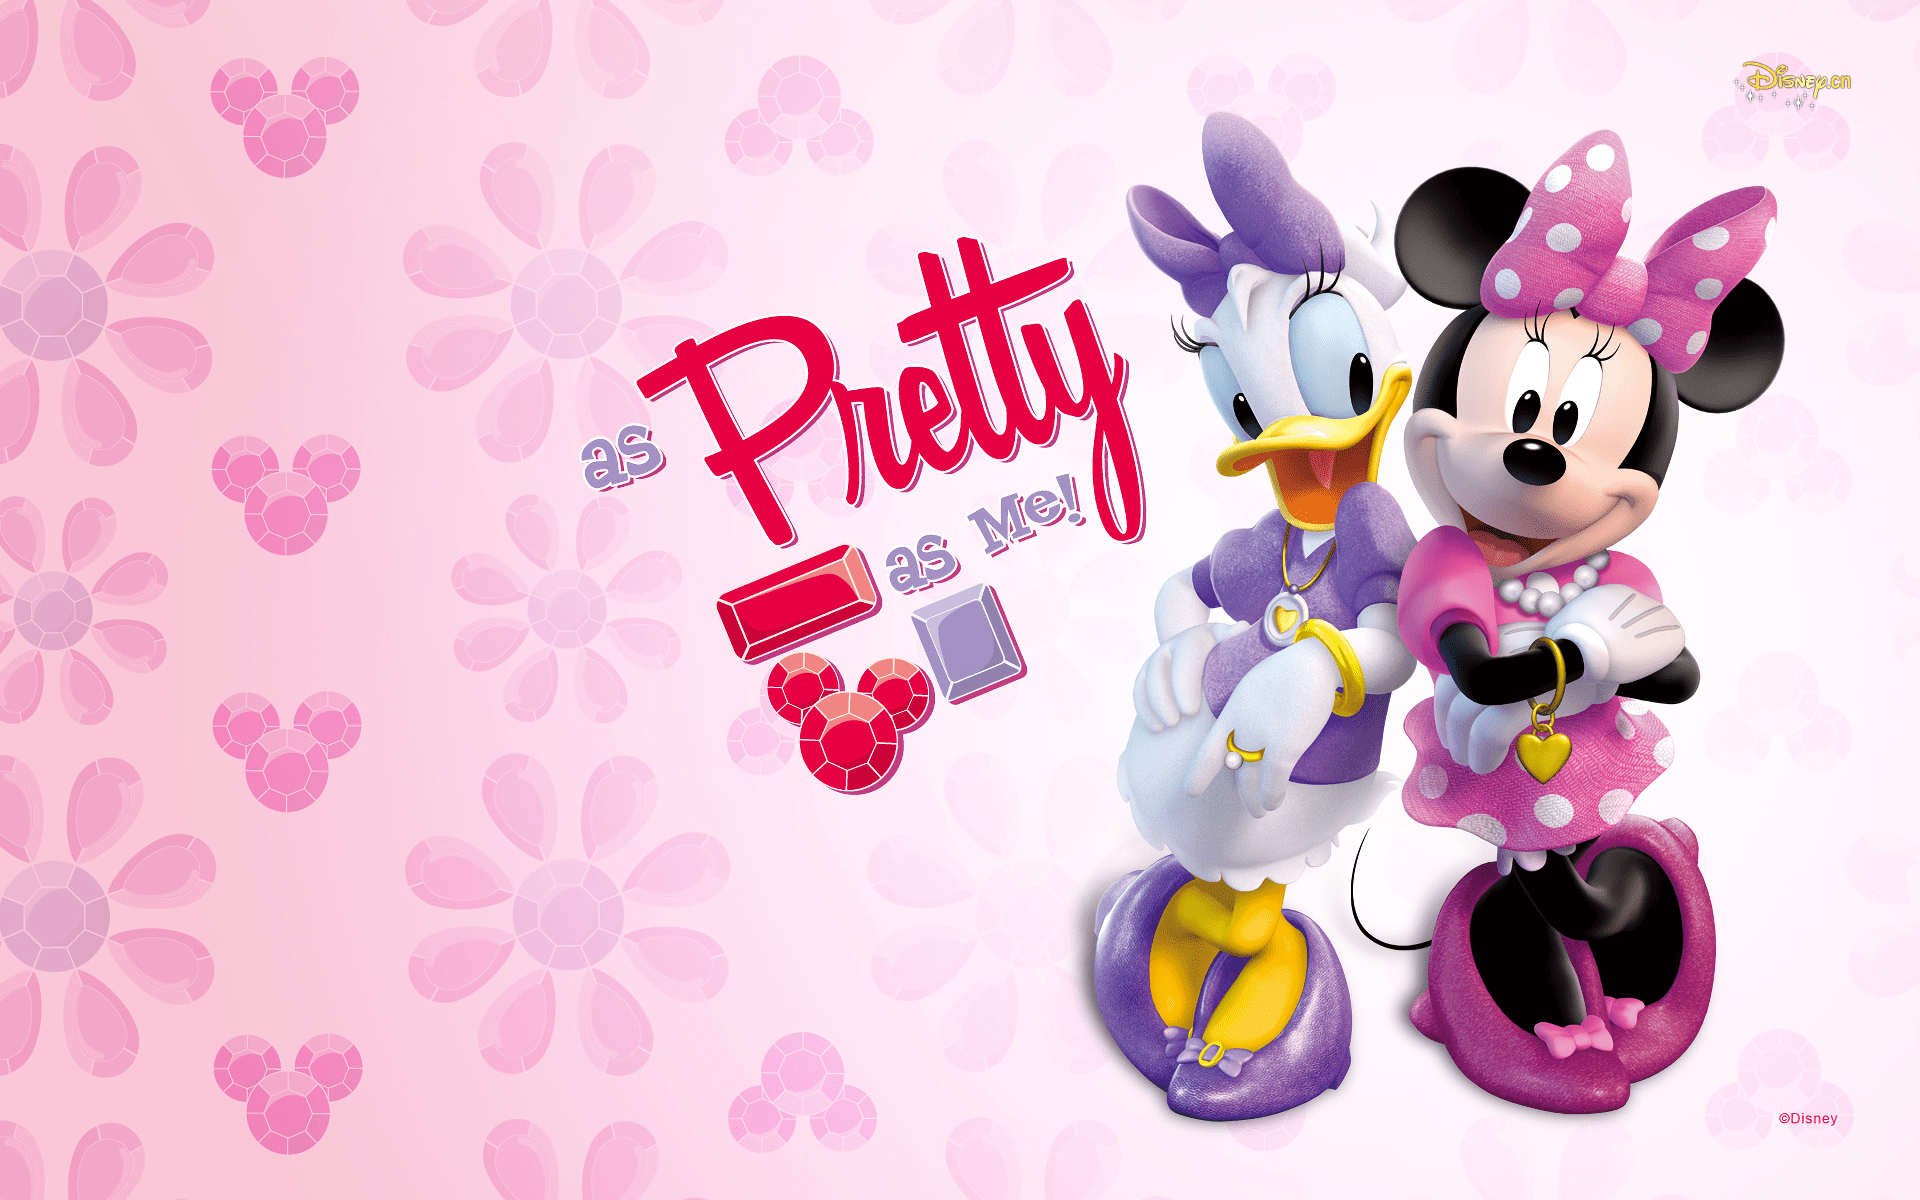 Minnie Mouse wallpaper with pink background and flowers - Minnie Mouse